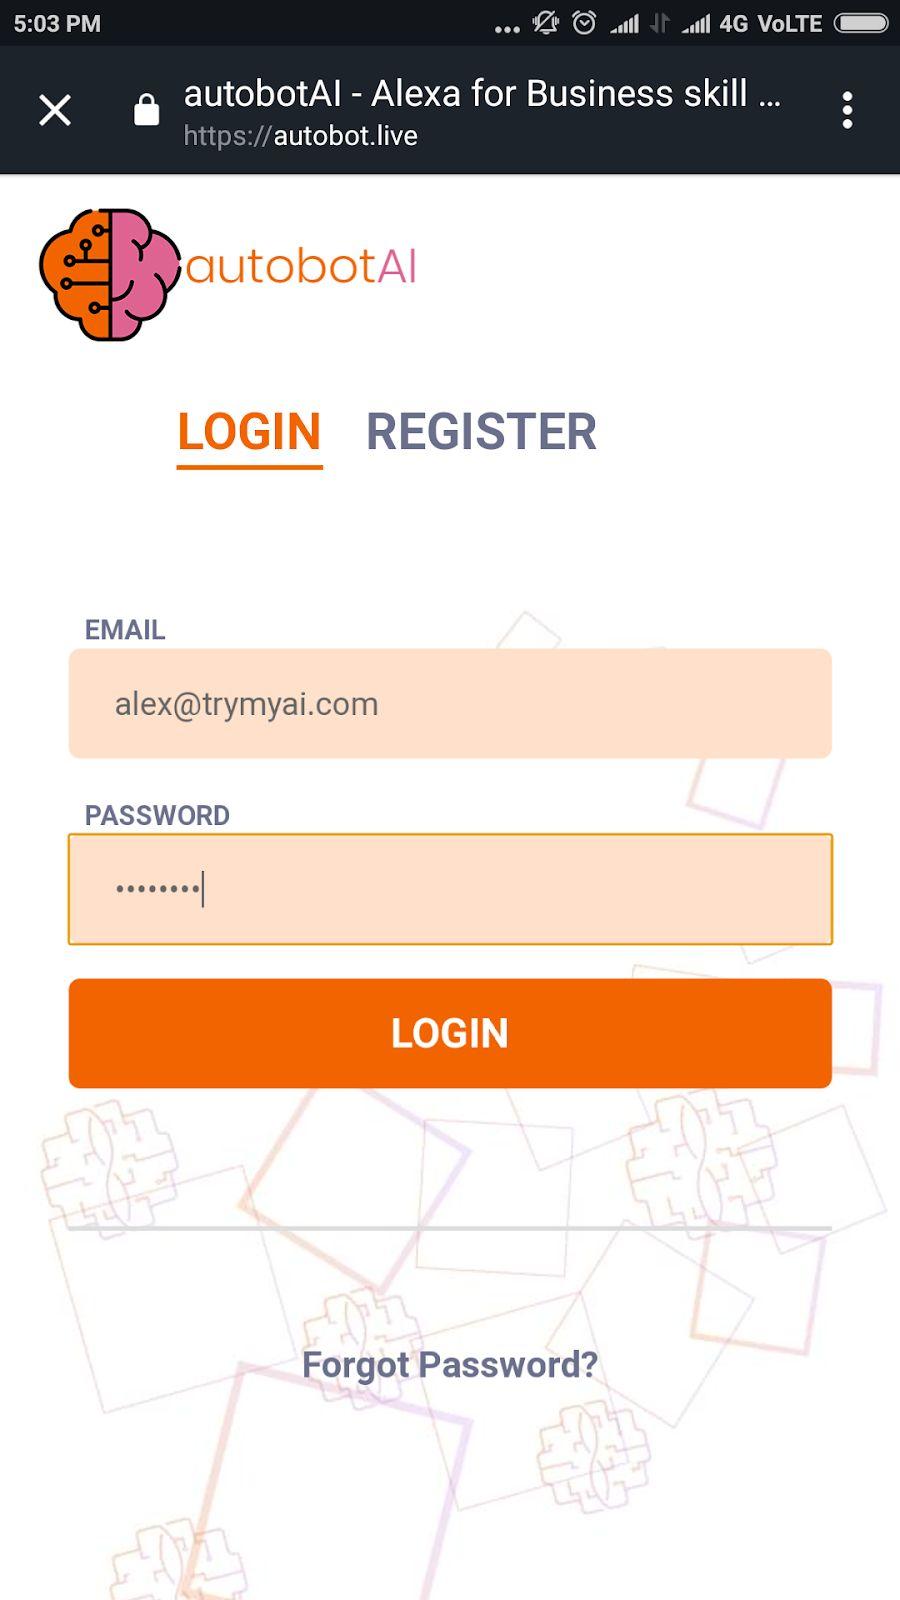 Enter the Login credentials created